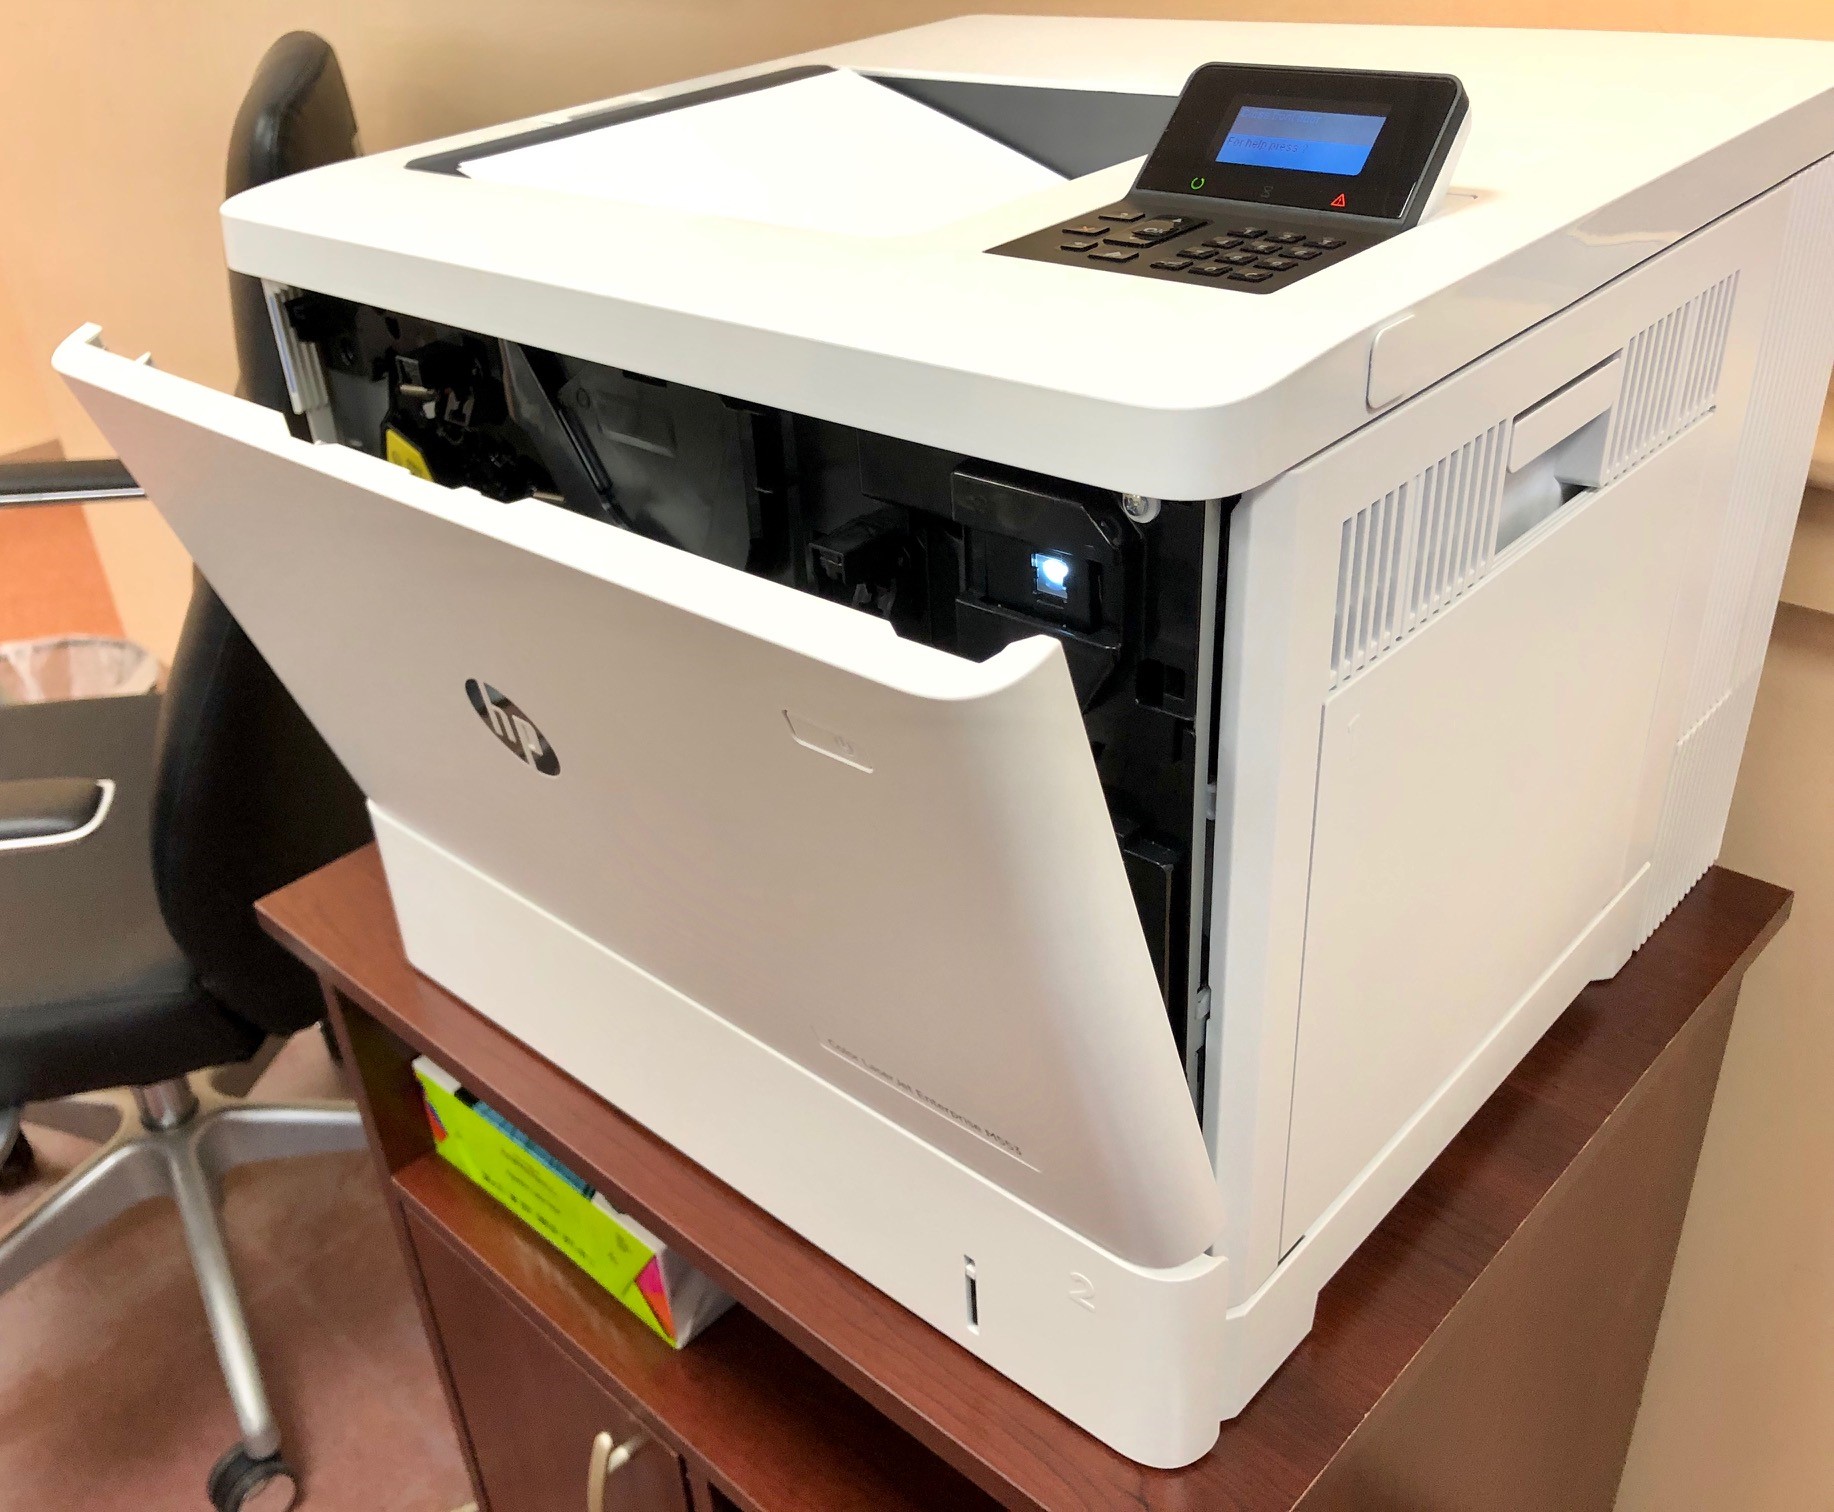 Trouble getting the door or cover on your laser printer closed?